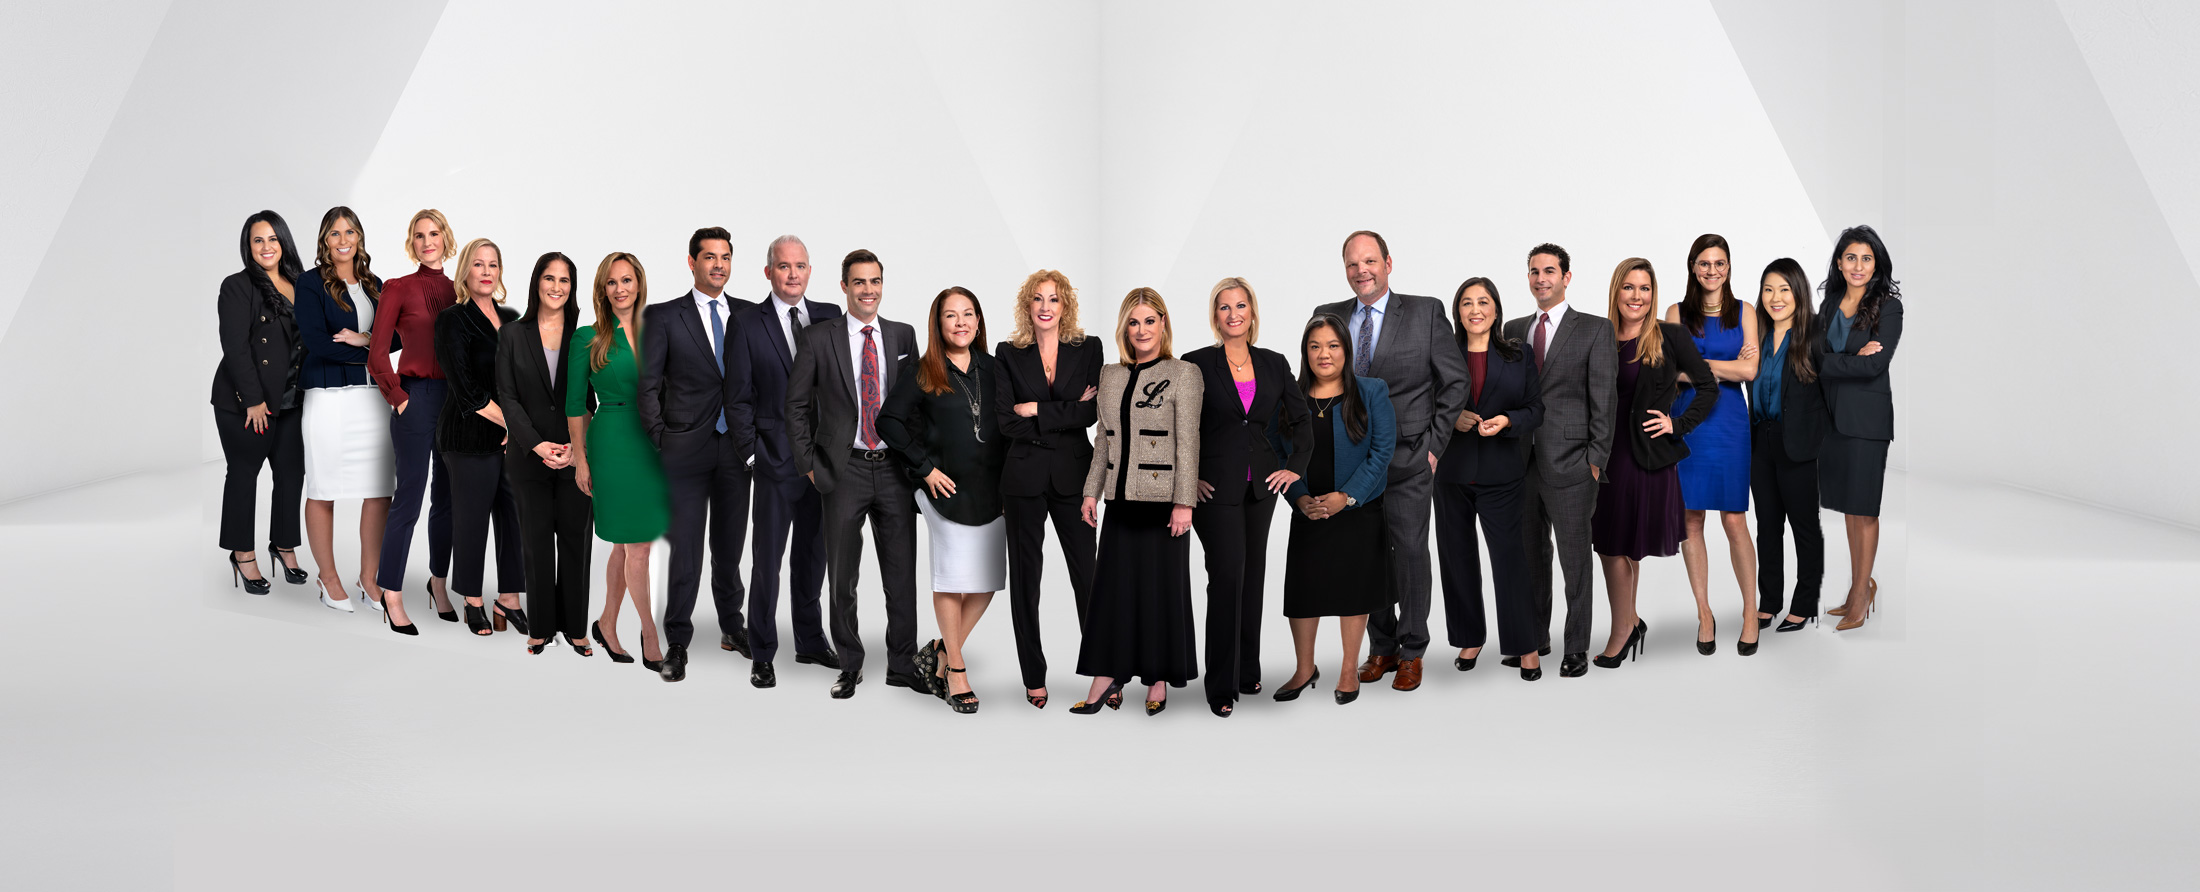 Group Photo of professionals at Law Offices Of Meyer, Olson, Lowy & Meyers, LLP